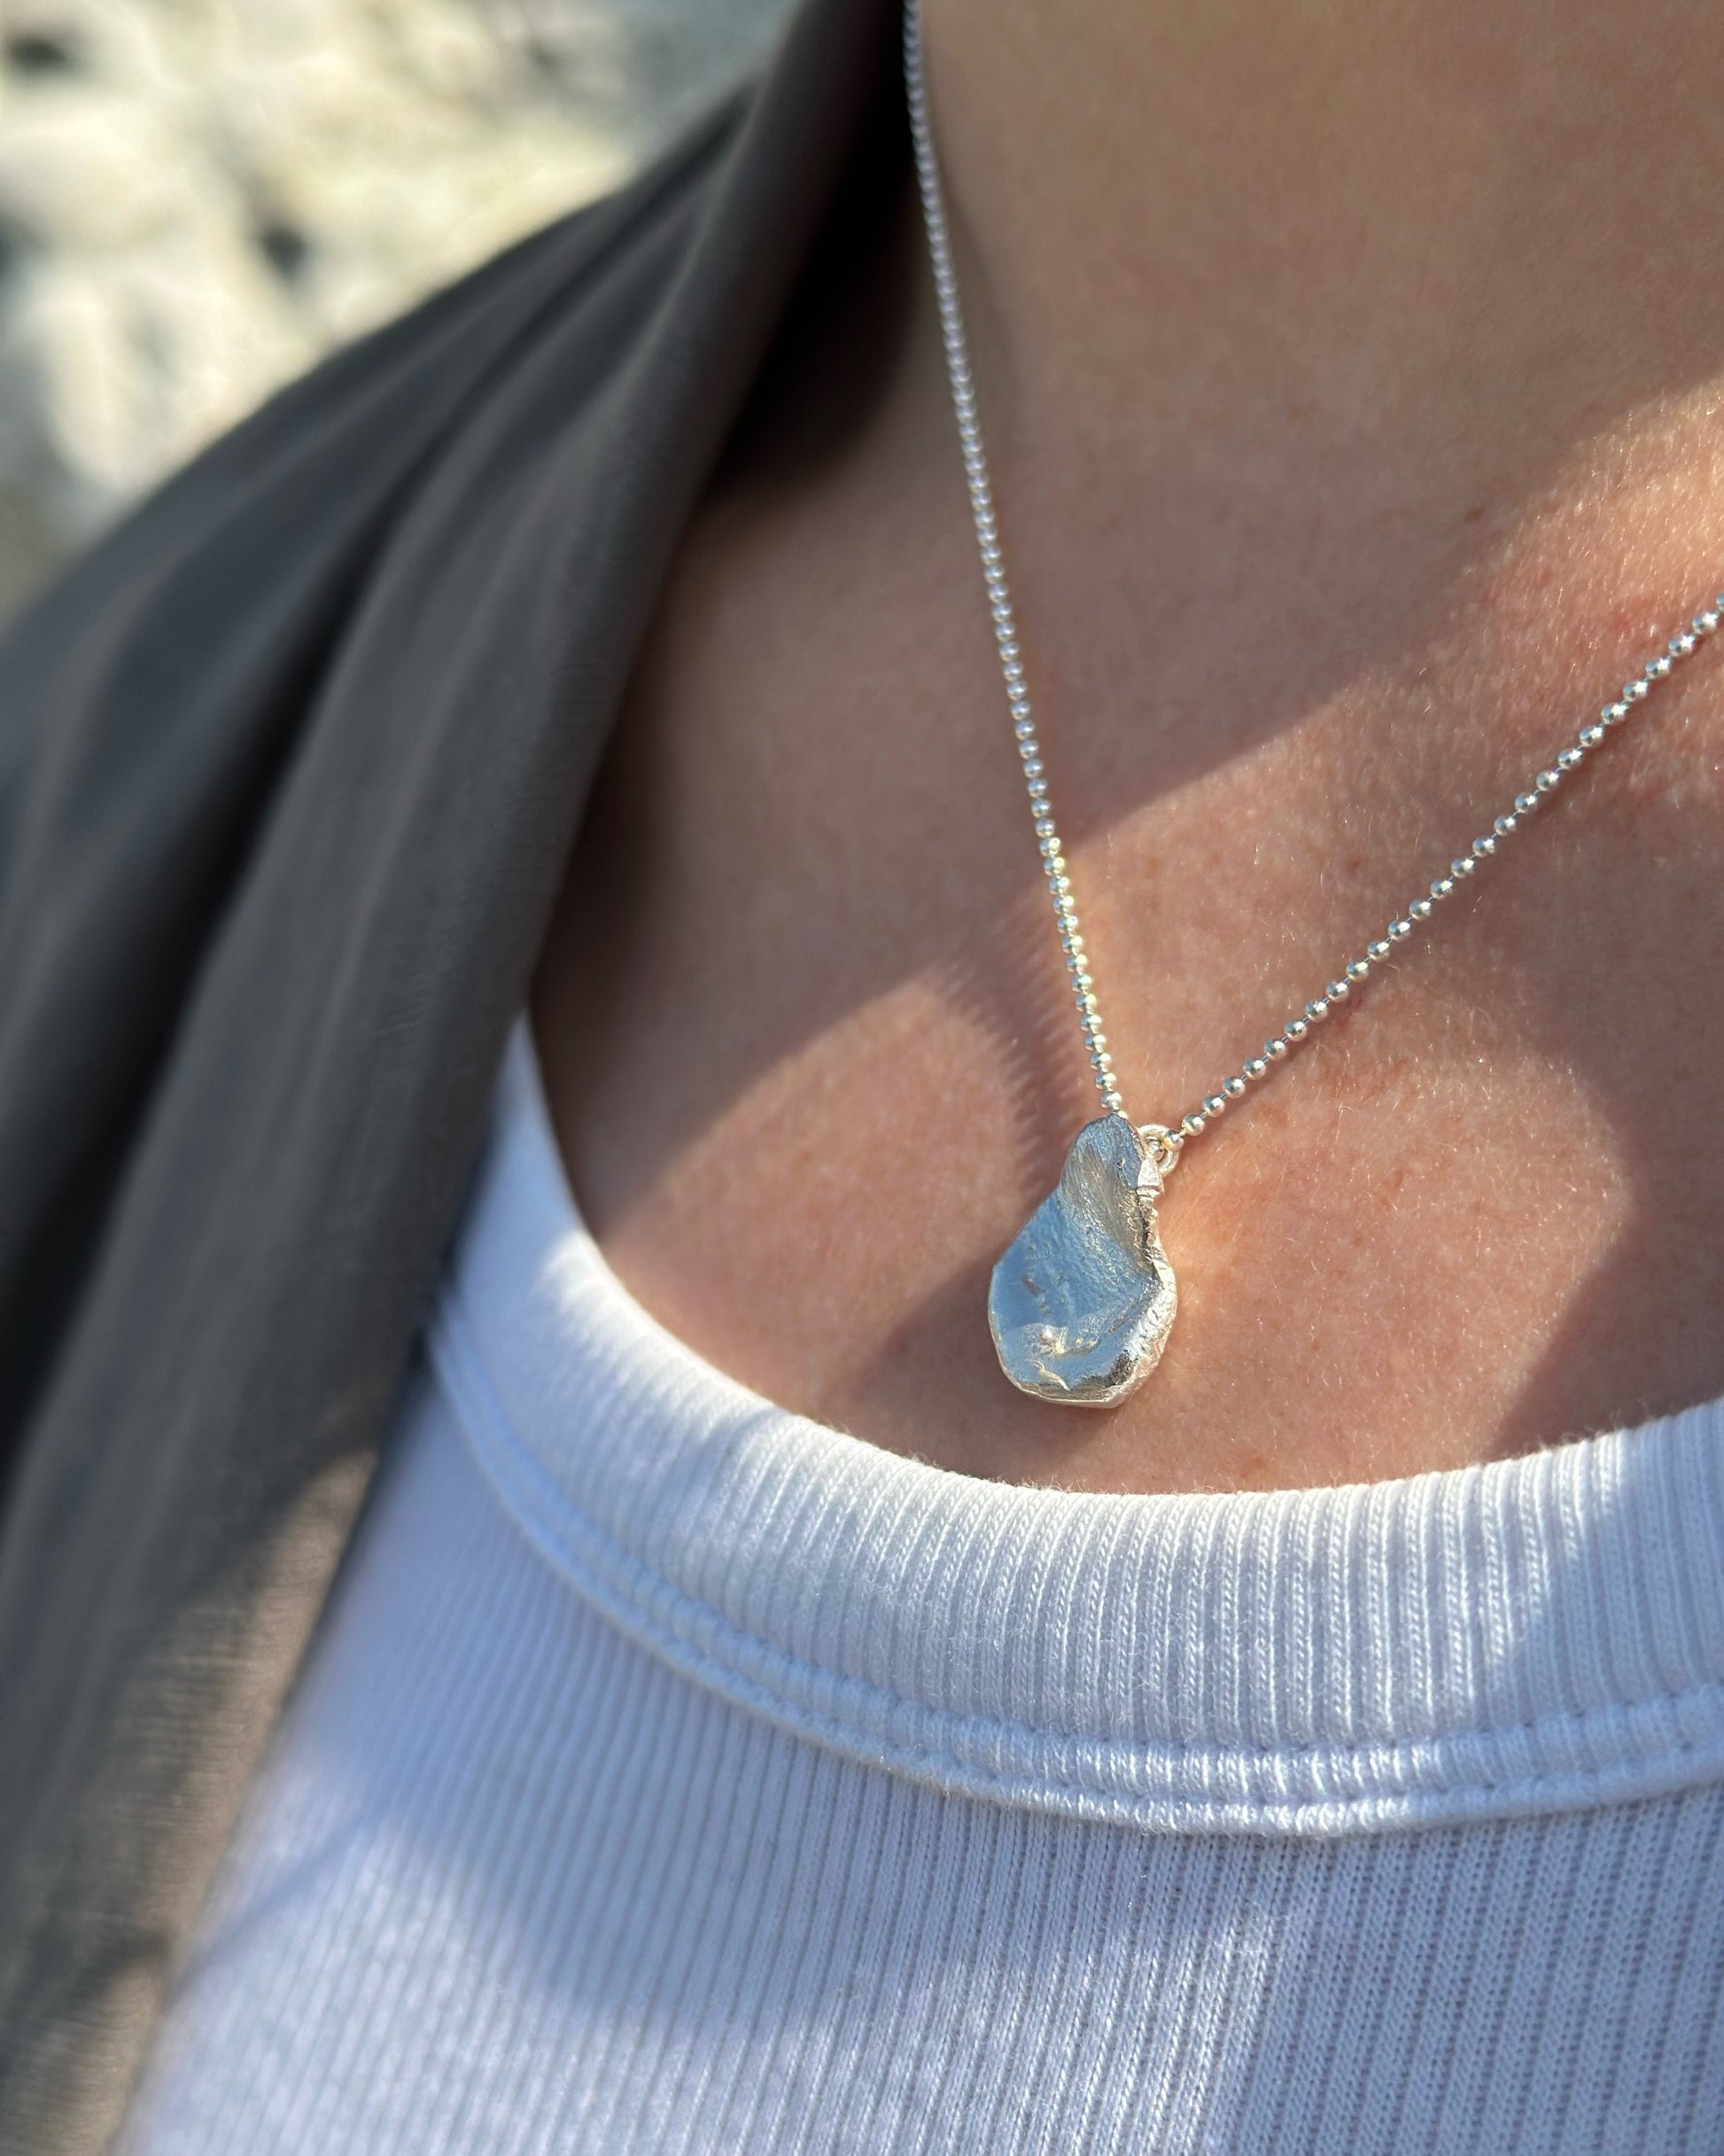 Droplet Necklace: a cast droplet of solid recycled silver on a recycled silver chain. Worn by a model.